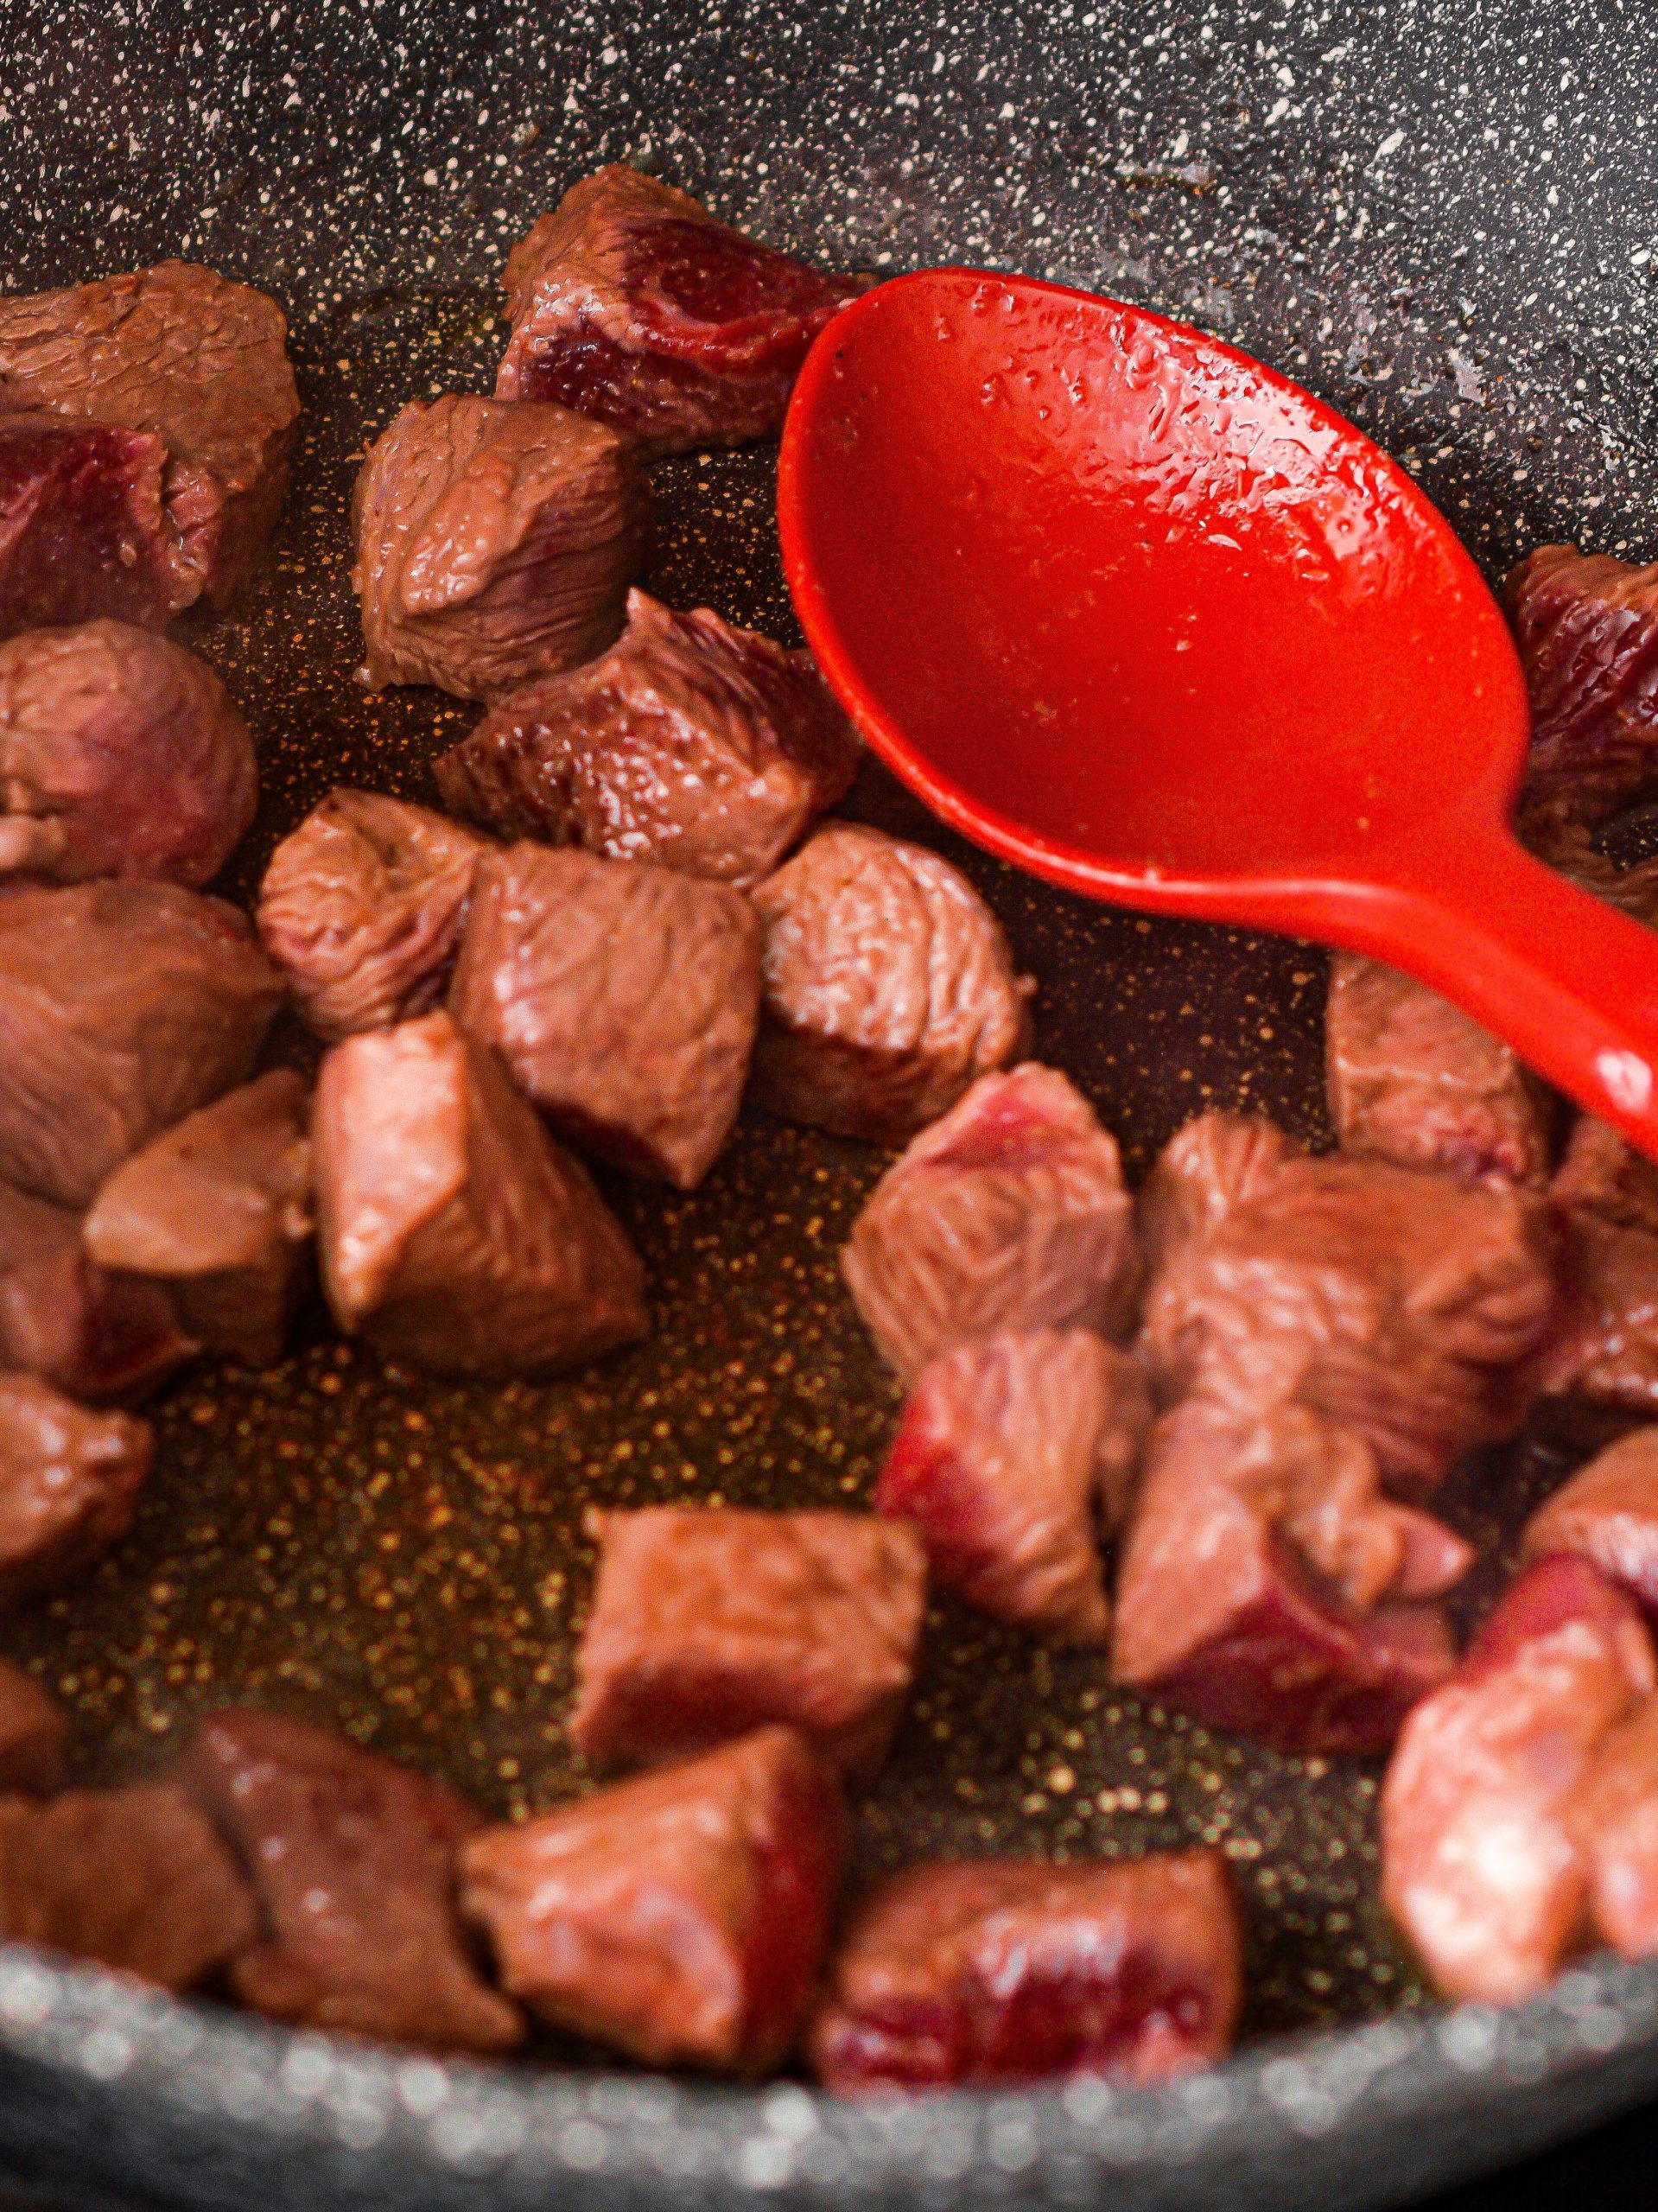 Add in the steak and season with salt, pepper, and seasonings of your choice.